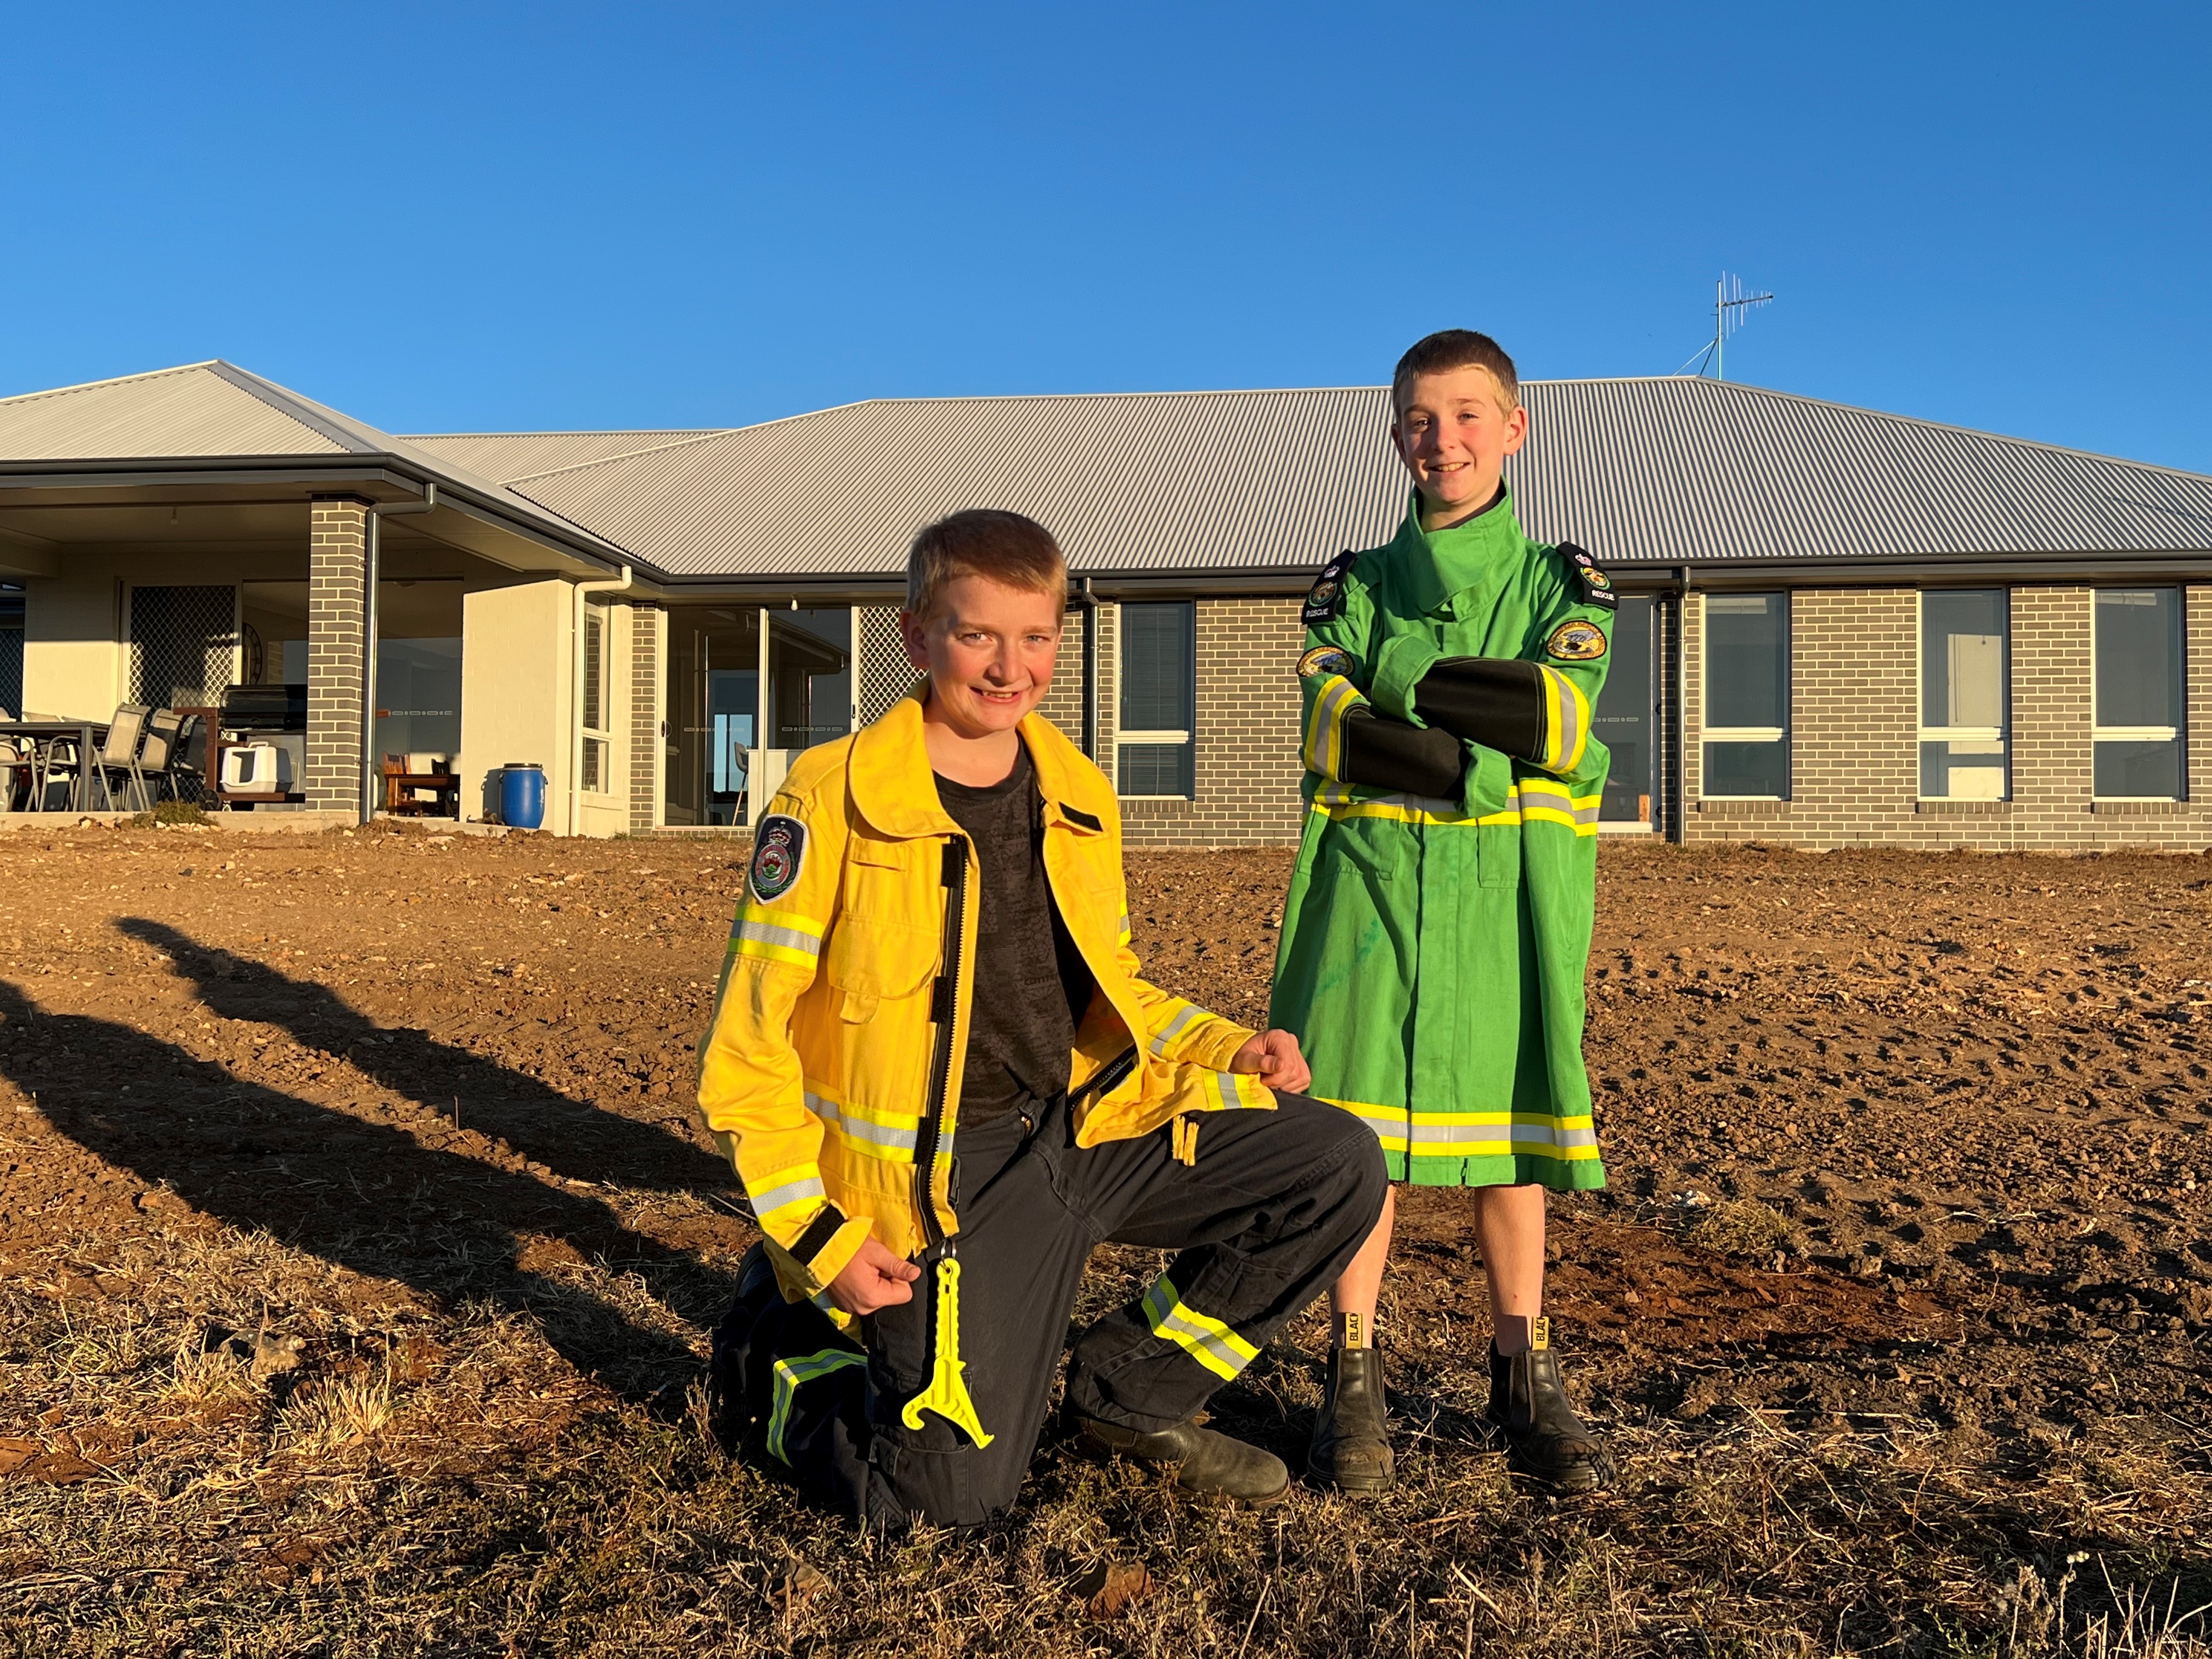 Lukalyptus a dream home for Merriwa’s emergency service family